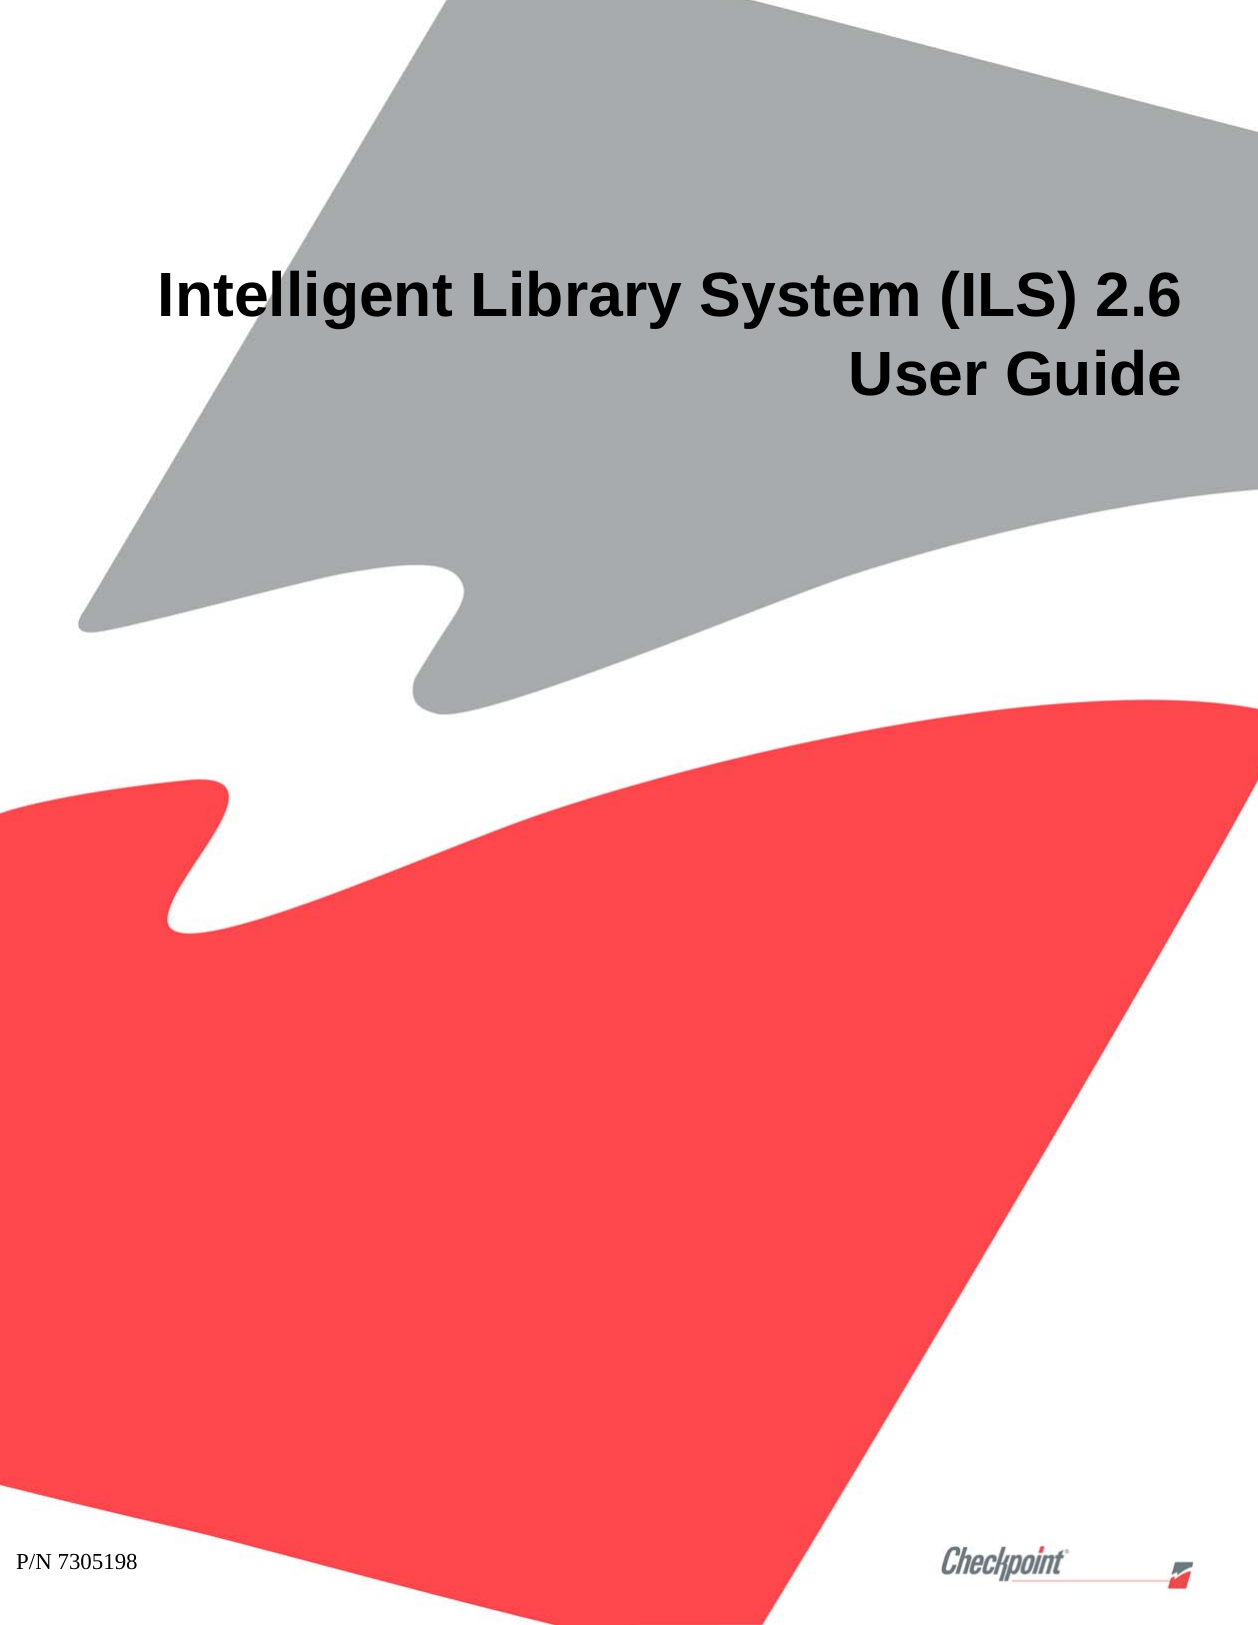 Intelligent Library System (ILS) 2.6User GuideP/N 7305198